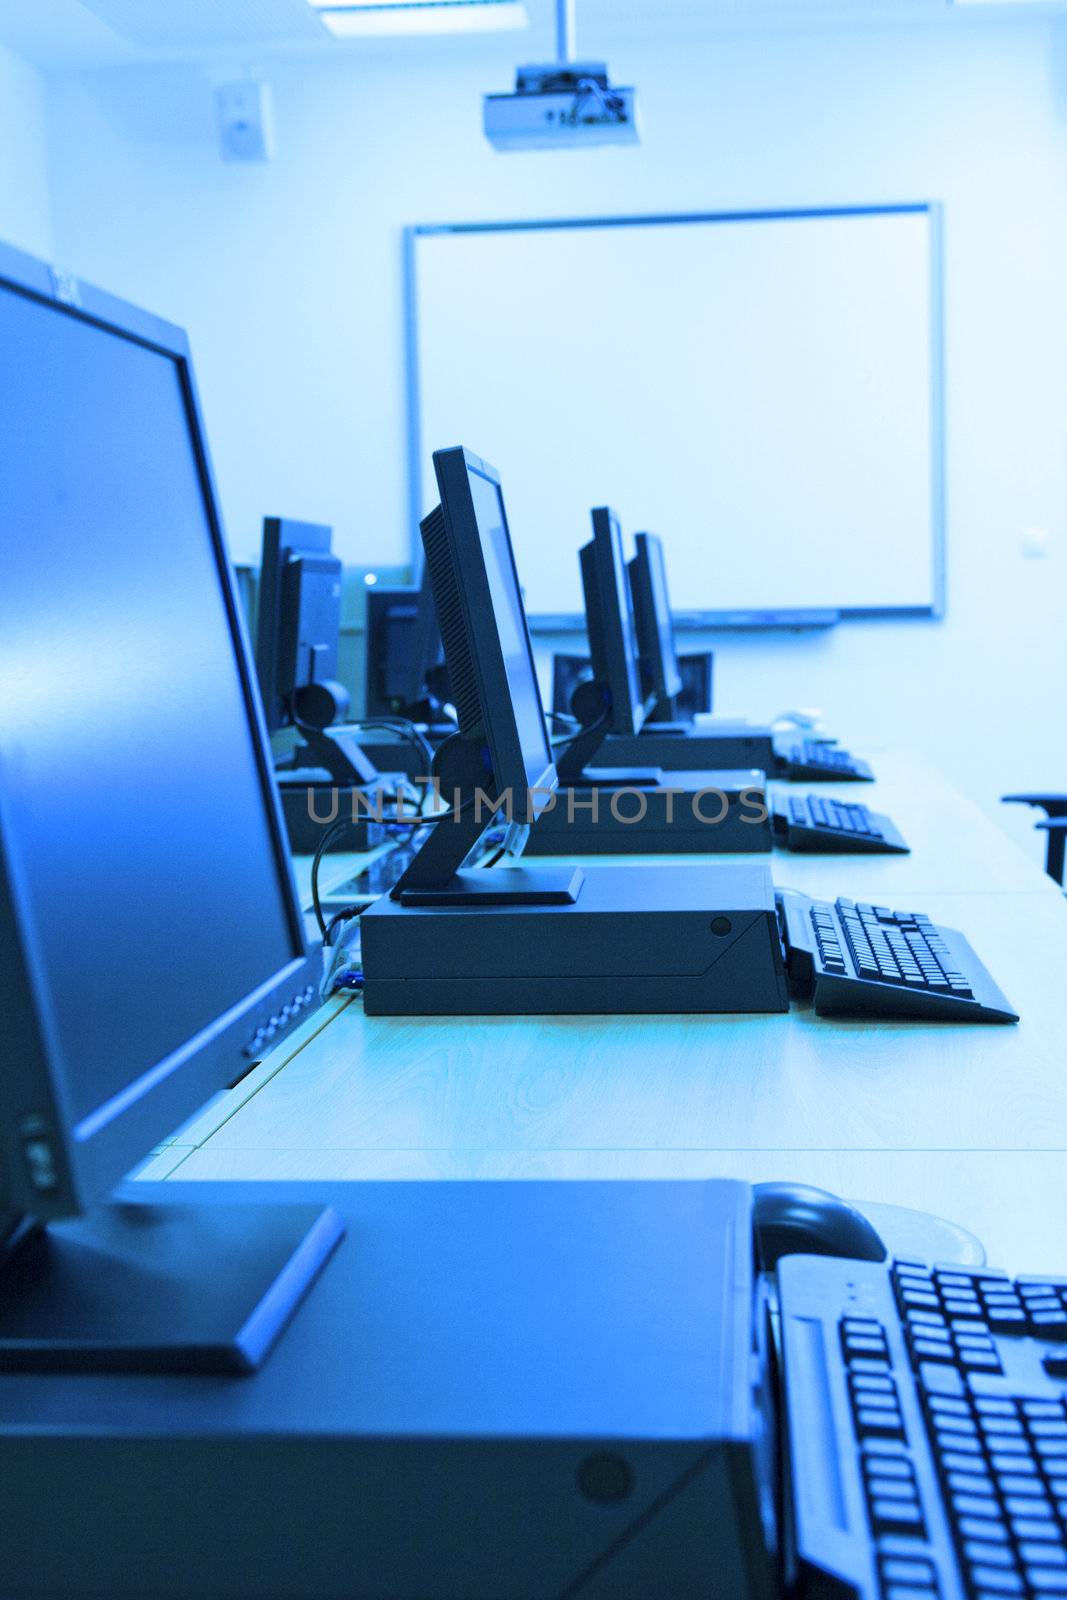 Room equipped with black computers. Image has blue tint.